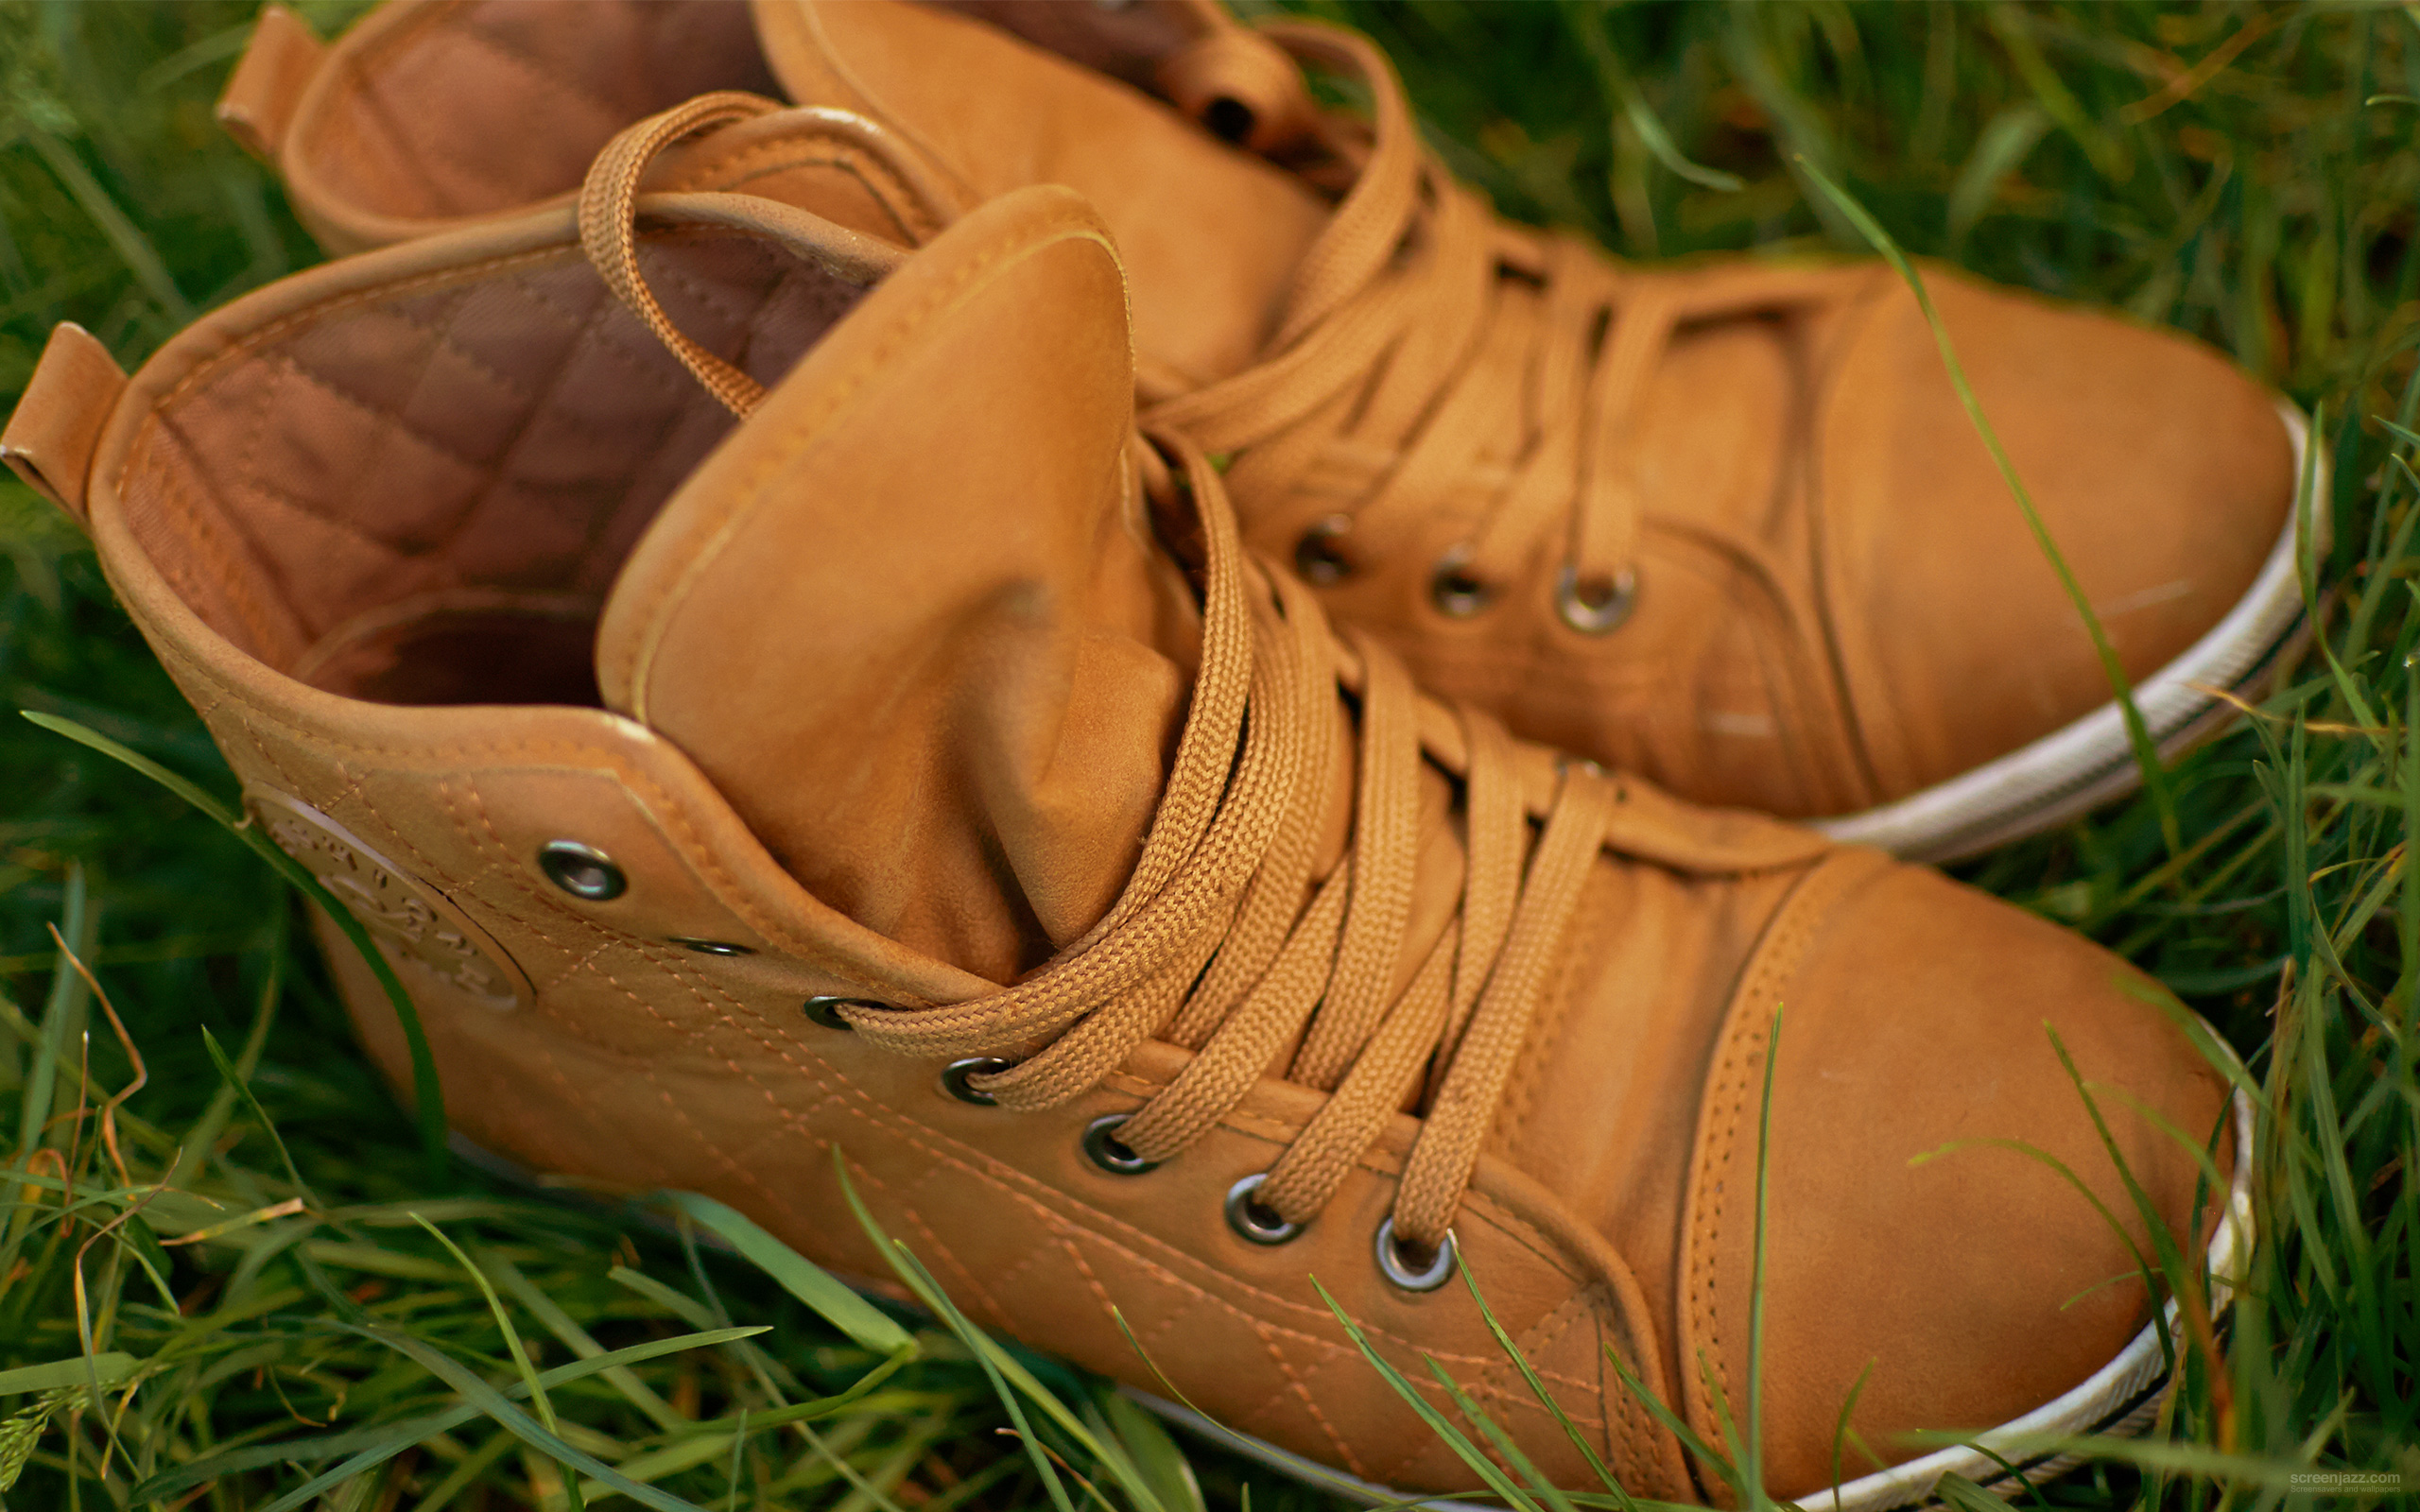 Tan Shoes 2560x1600 Download High Quality Hd Wallpapers For Free Wide